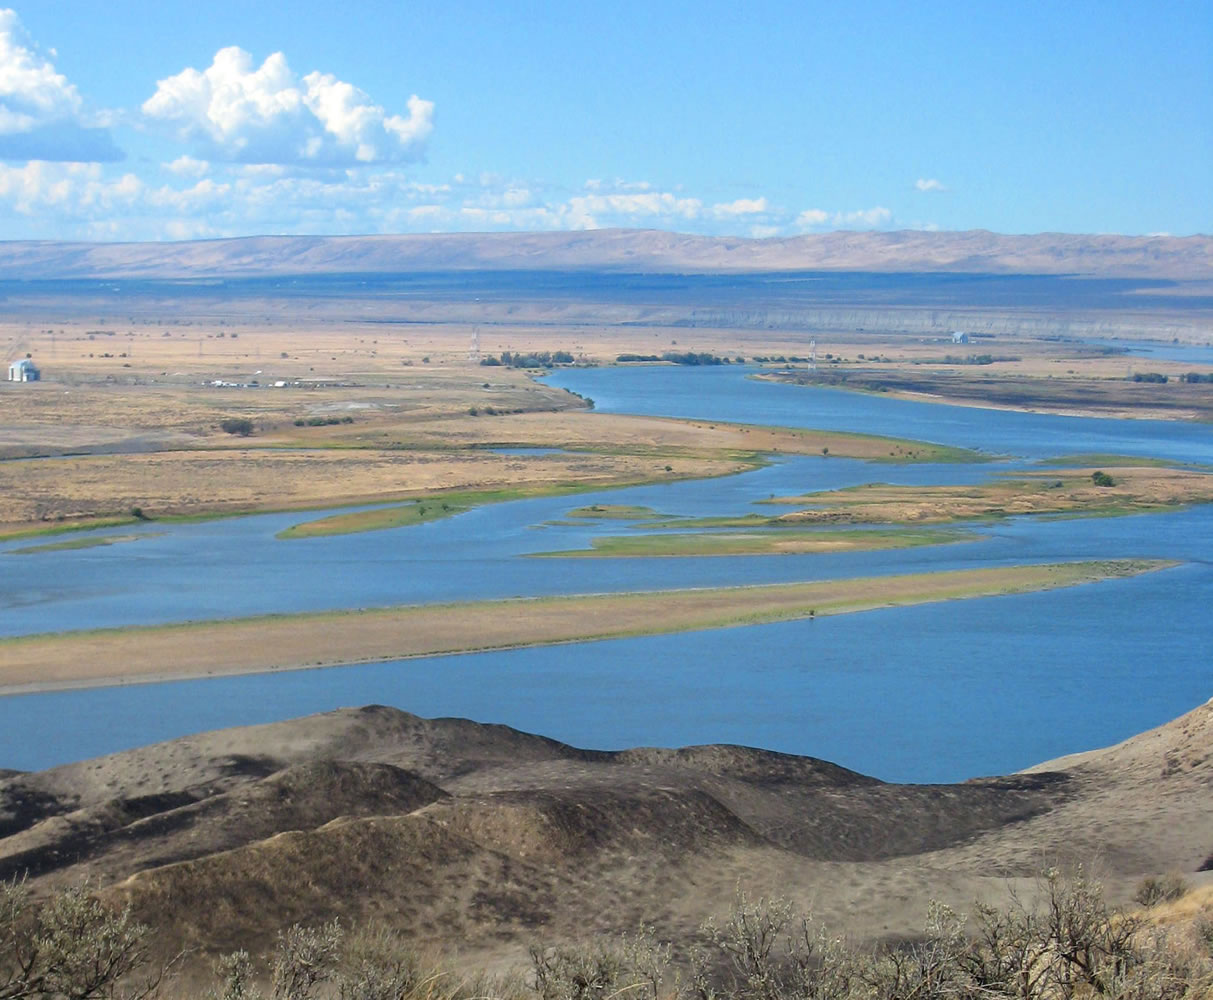 The Columbia River flows through the Hanford Reach National Monument in 2007. Scientists estimate 200,000 chinook are spawning in the Hanford Reach, the most fish ever counted in this area since dams were constructed in the 1930s.